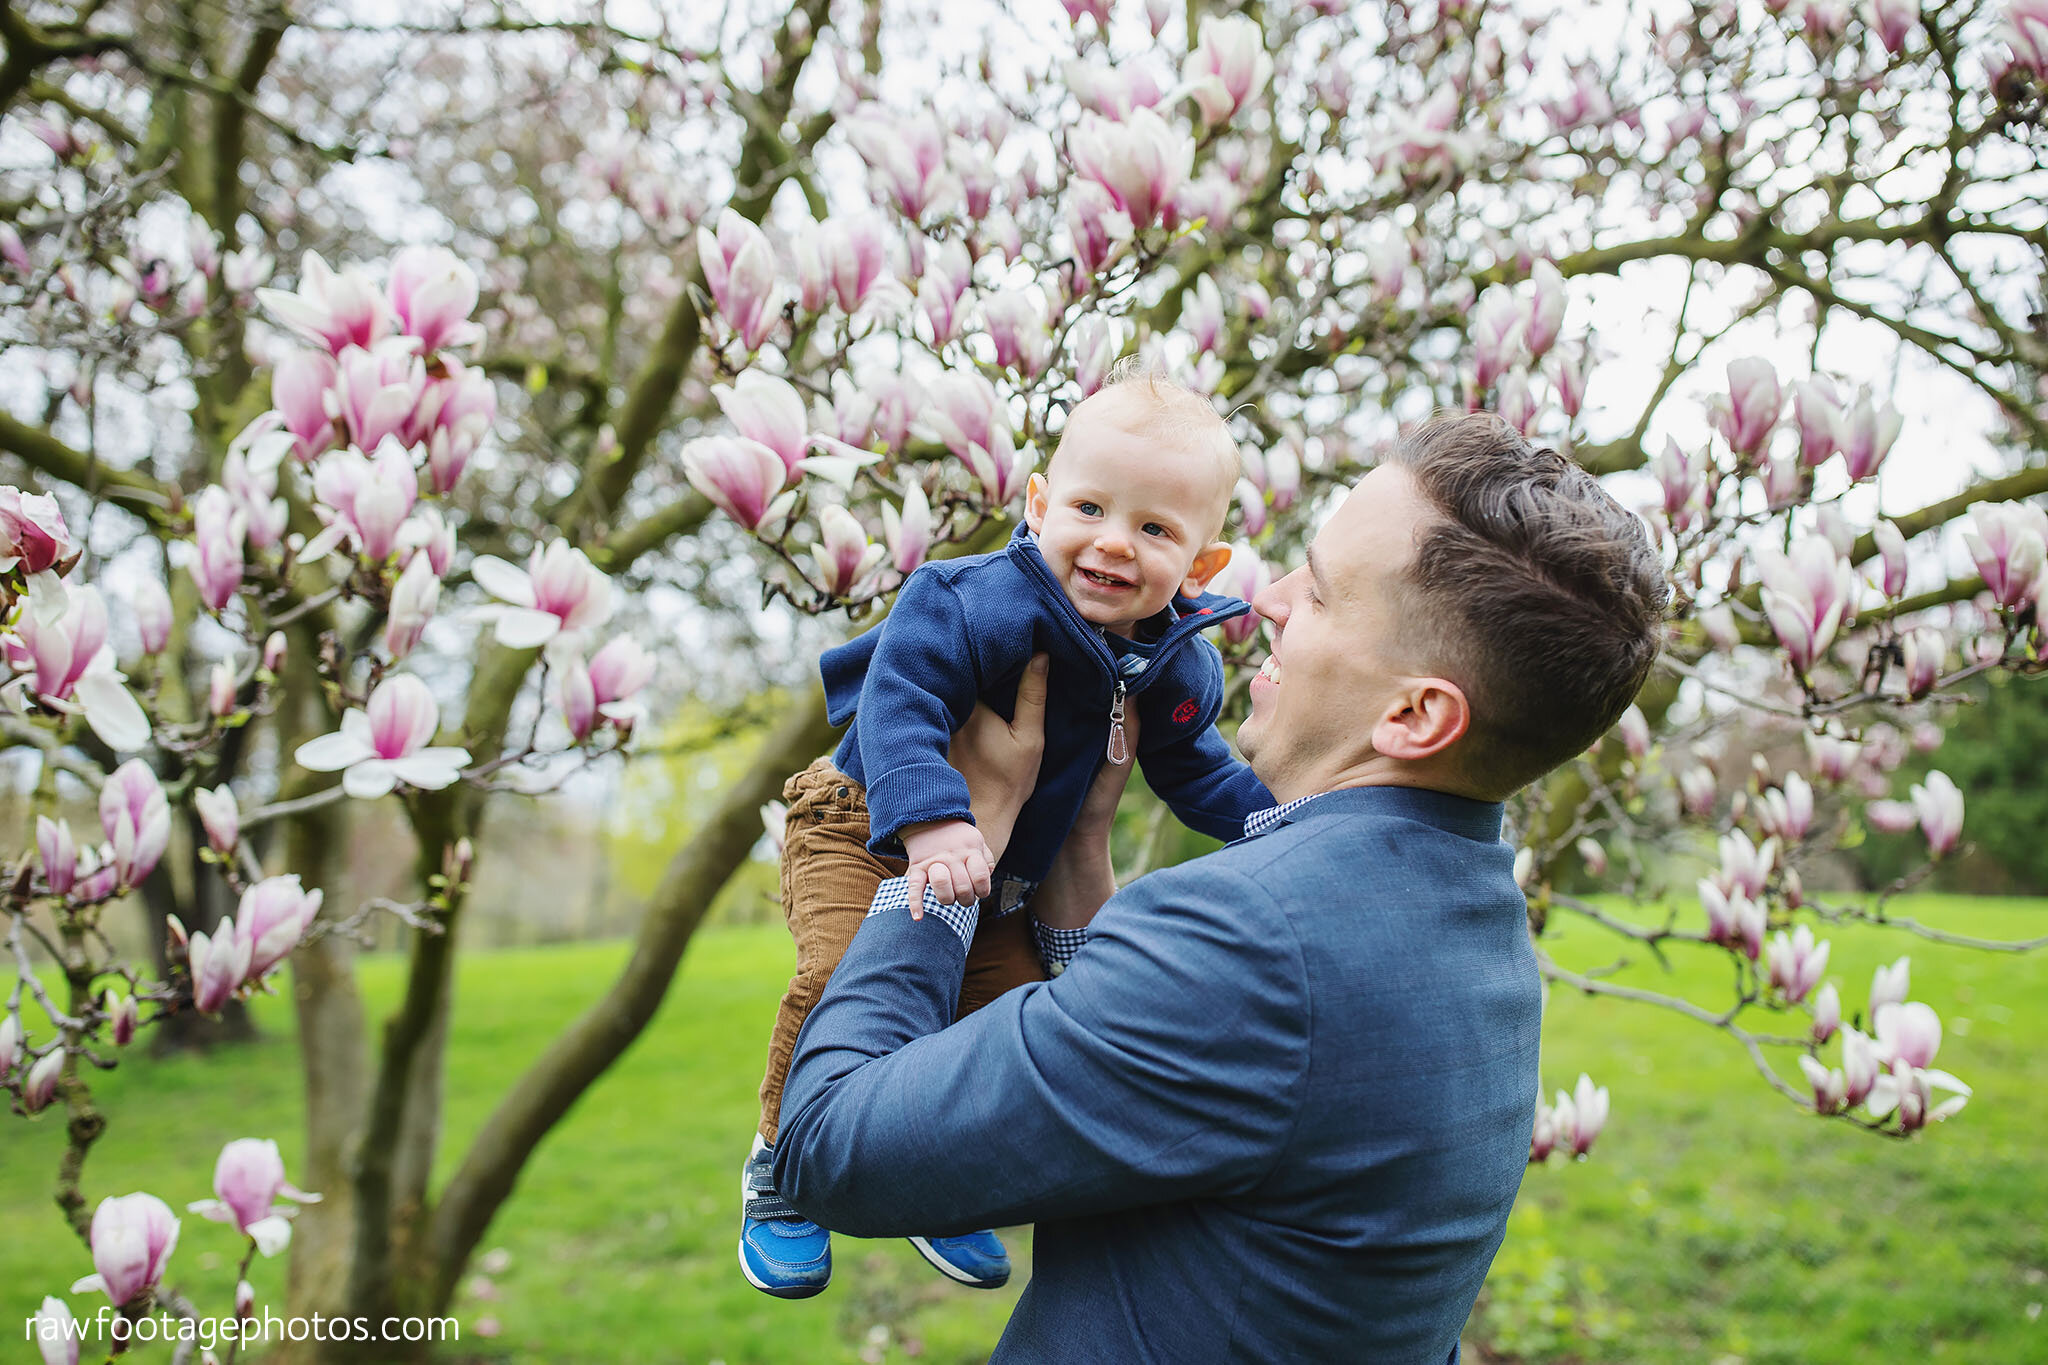 london_ontario_family_photographer-raw_footage_photography-spring_blossoms-extended_family_session-magnolia-blossoms_021.jpg